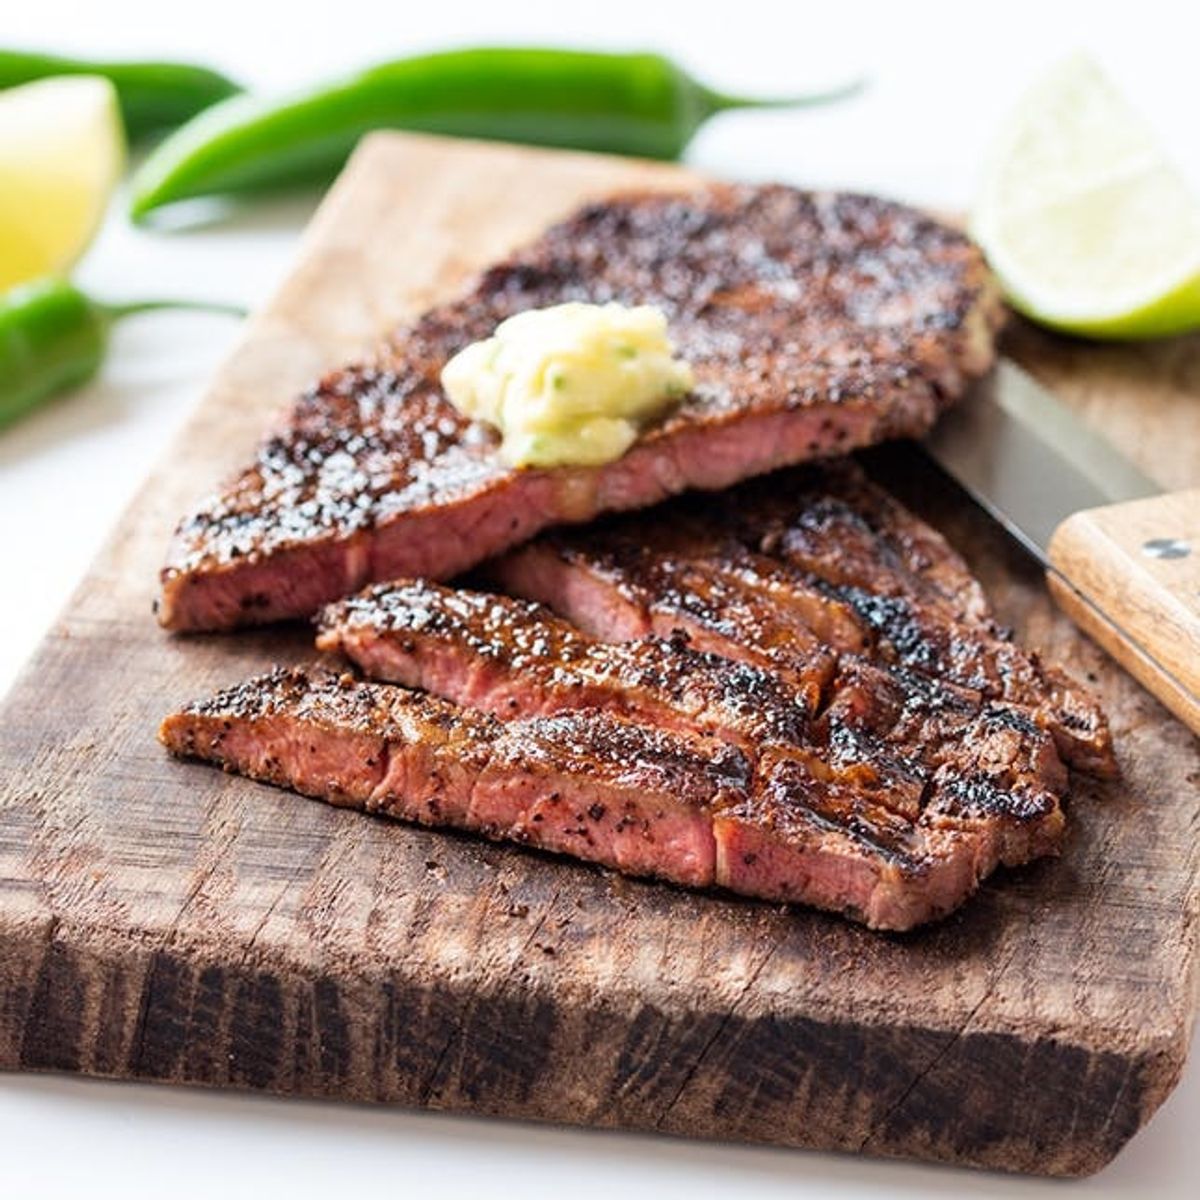 Why You Should Be Rubbing Coffee on Your Steak